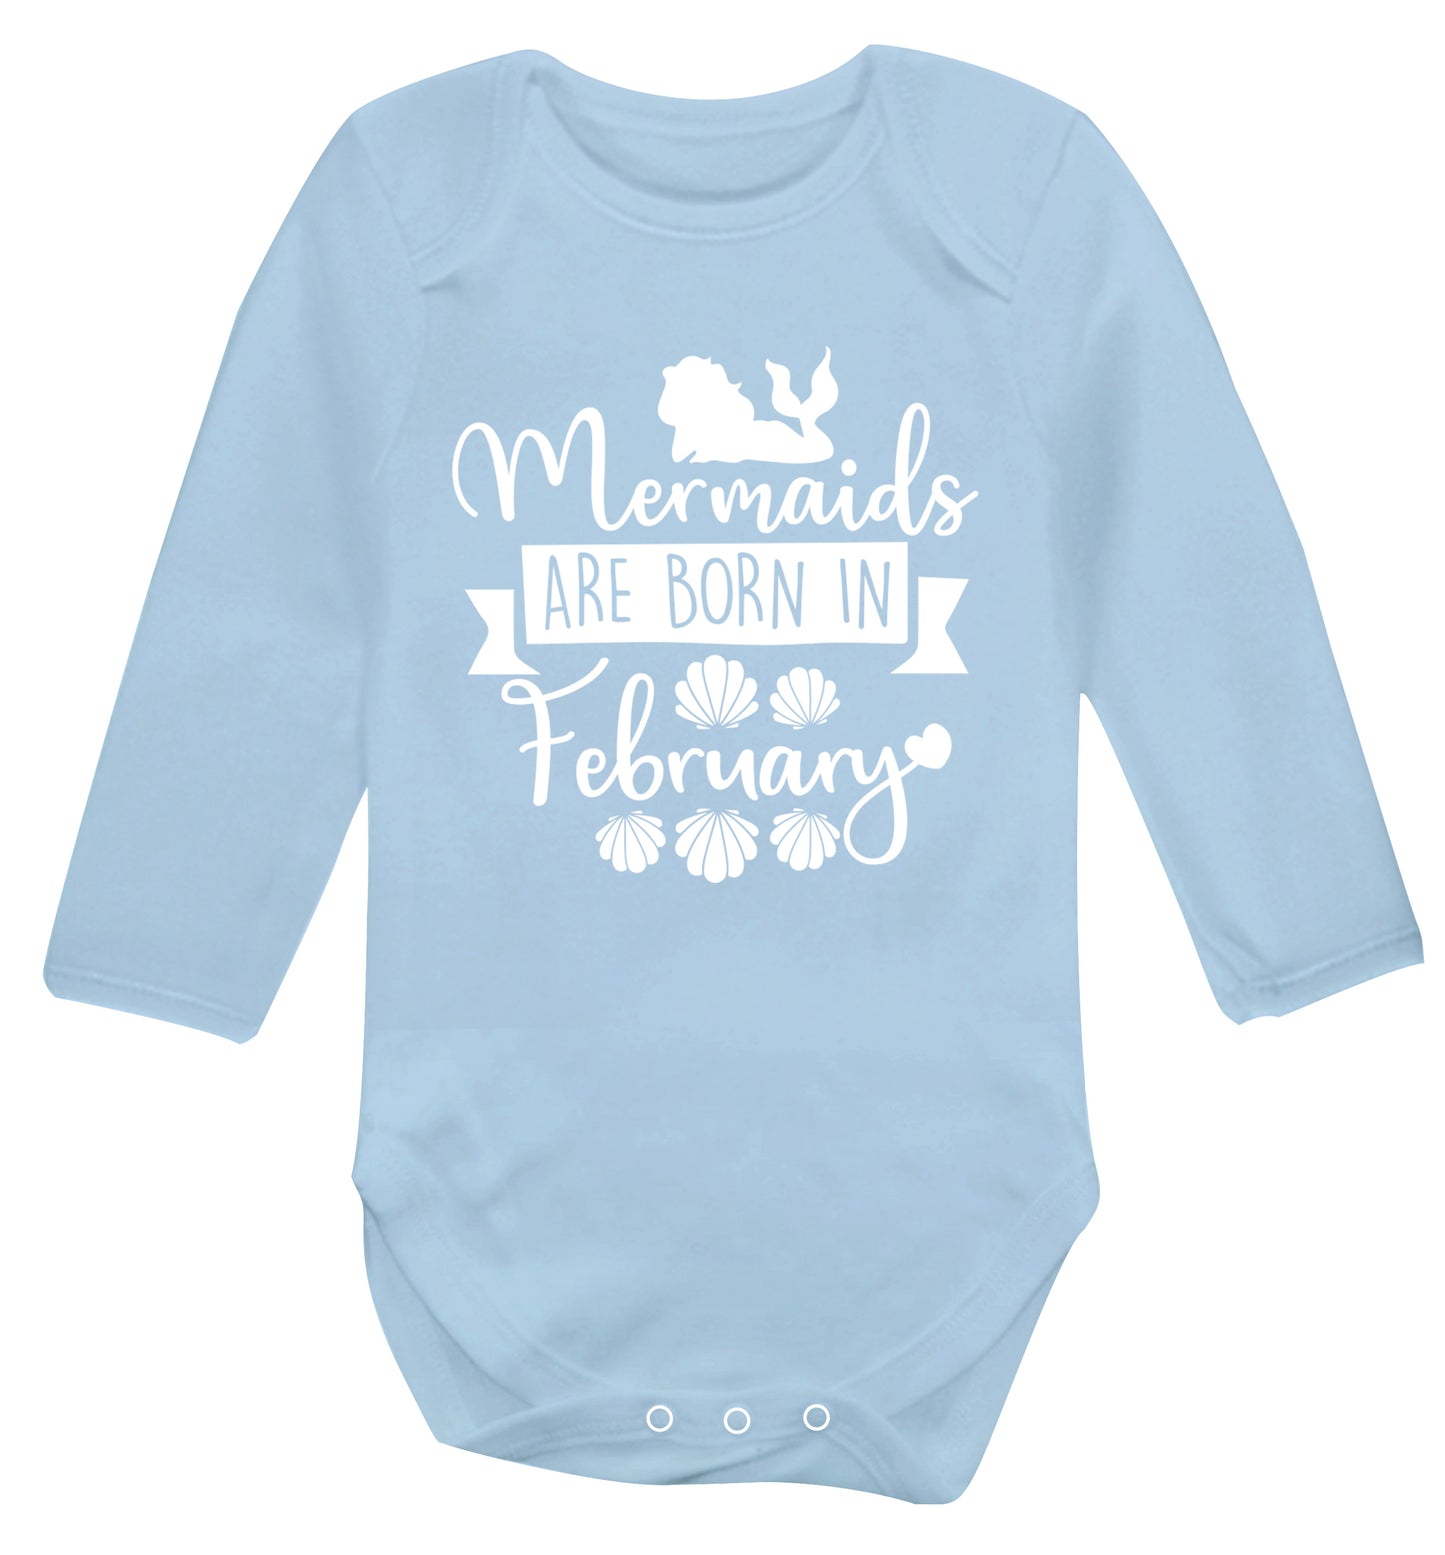 Mermaids are born in February Baby Vest long sleeved pale blue 6-12 months